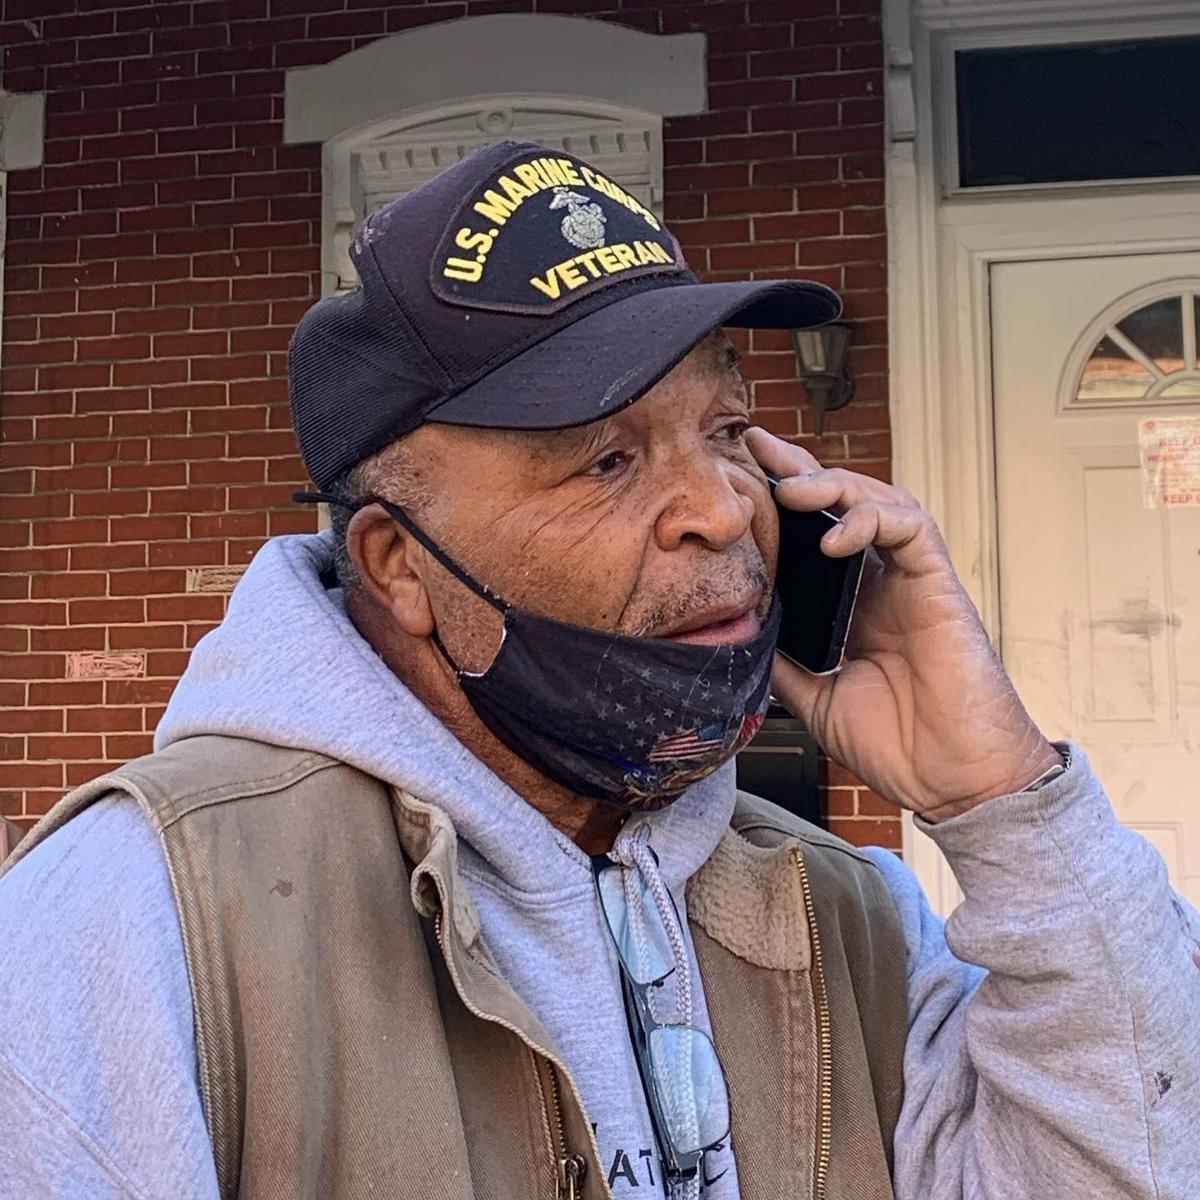 James "Cowboy" Johnson called 911 after seeing his neighbor's house ablaze. (Courtesy of <a href="https://www.facebook.com/NorristownFireDepartment/">Norristown Fire Department</a>)